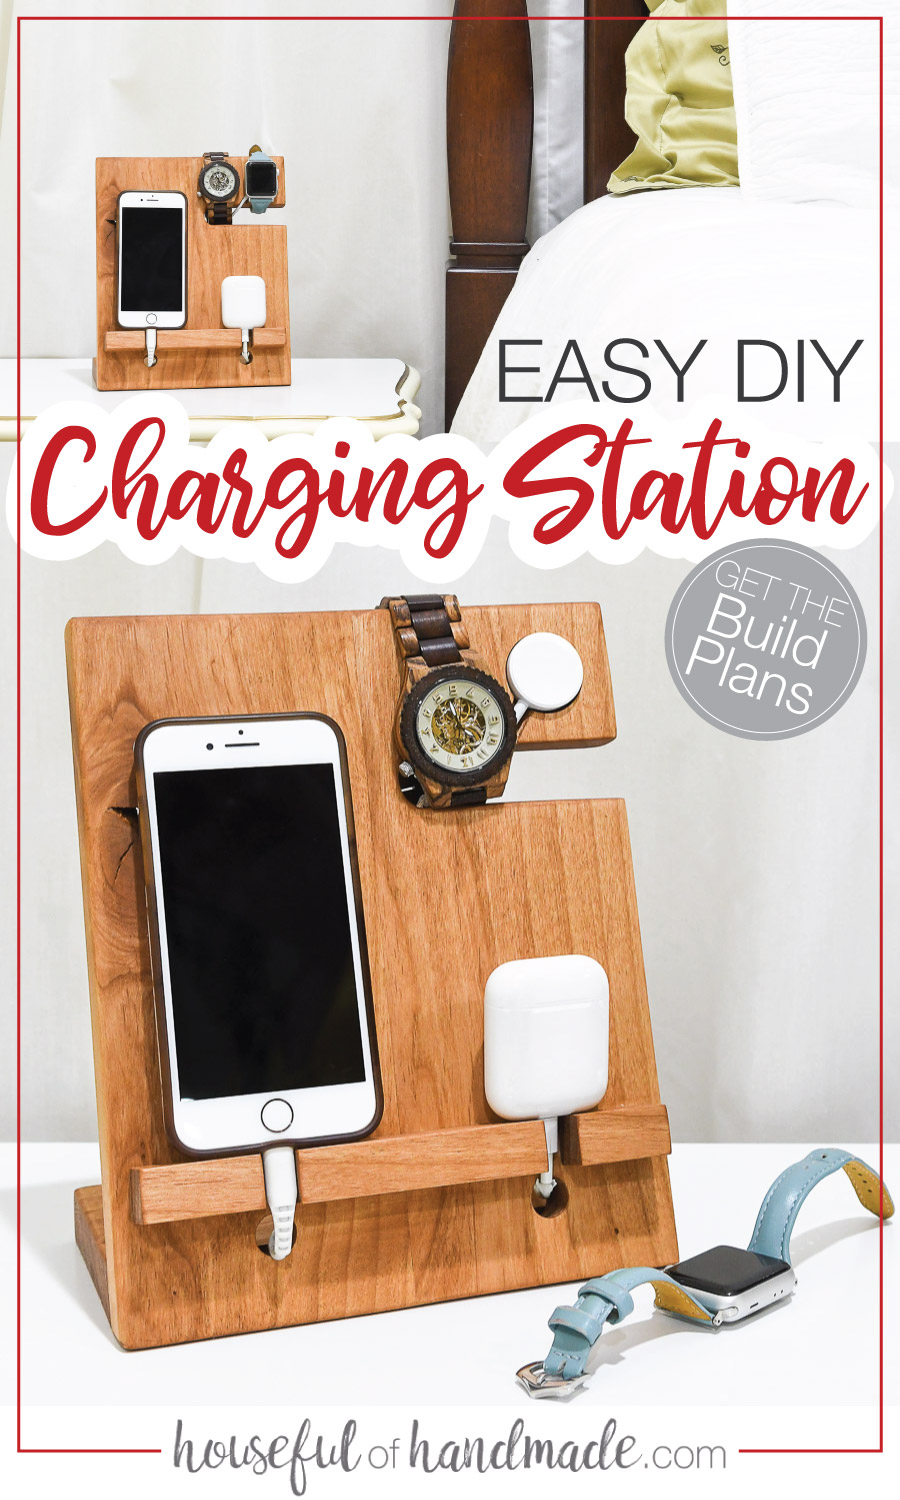 Two pictures of the nightstand valet charging station with word overlay. 